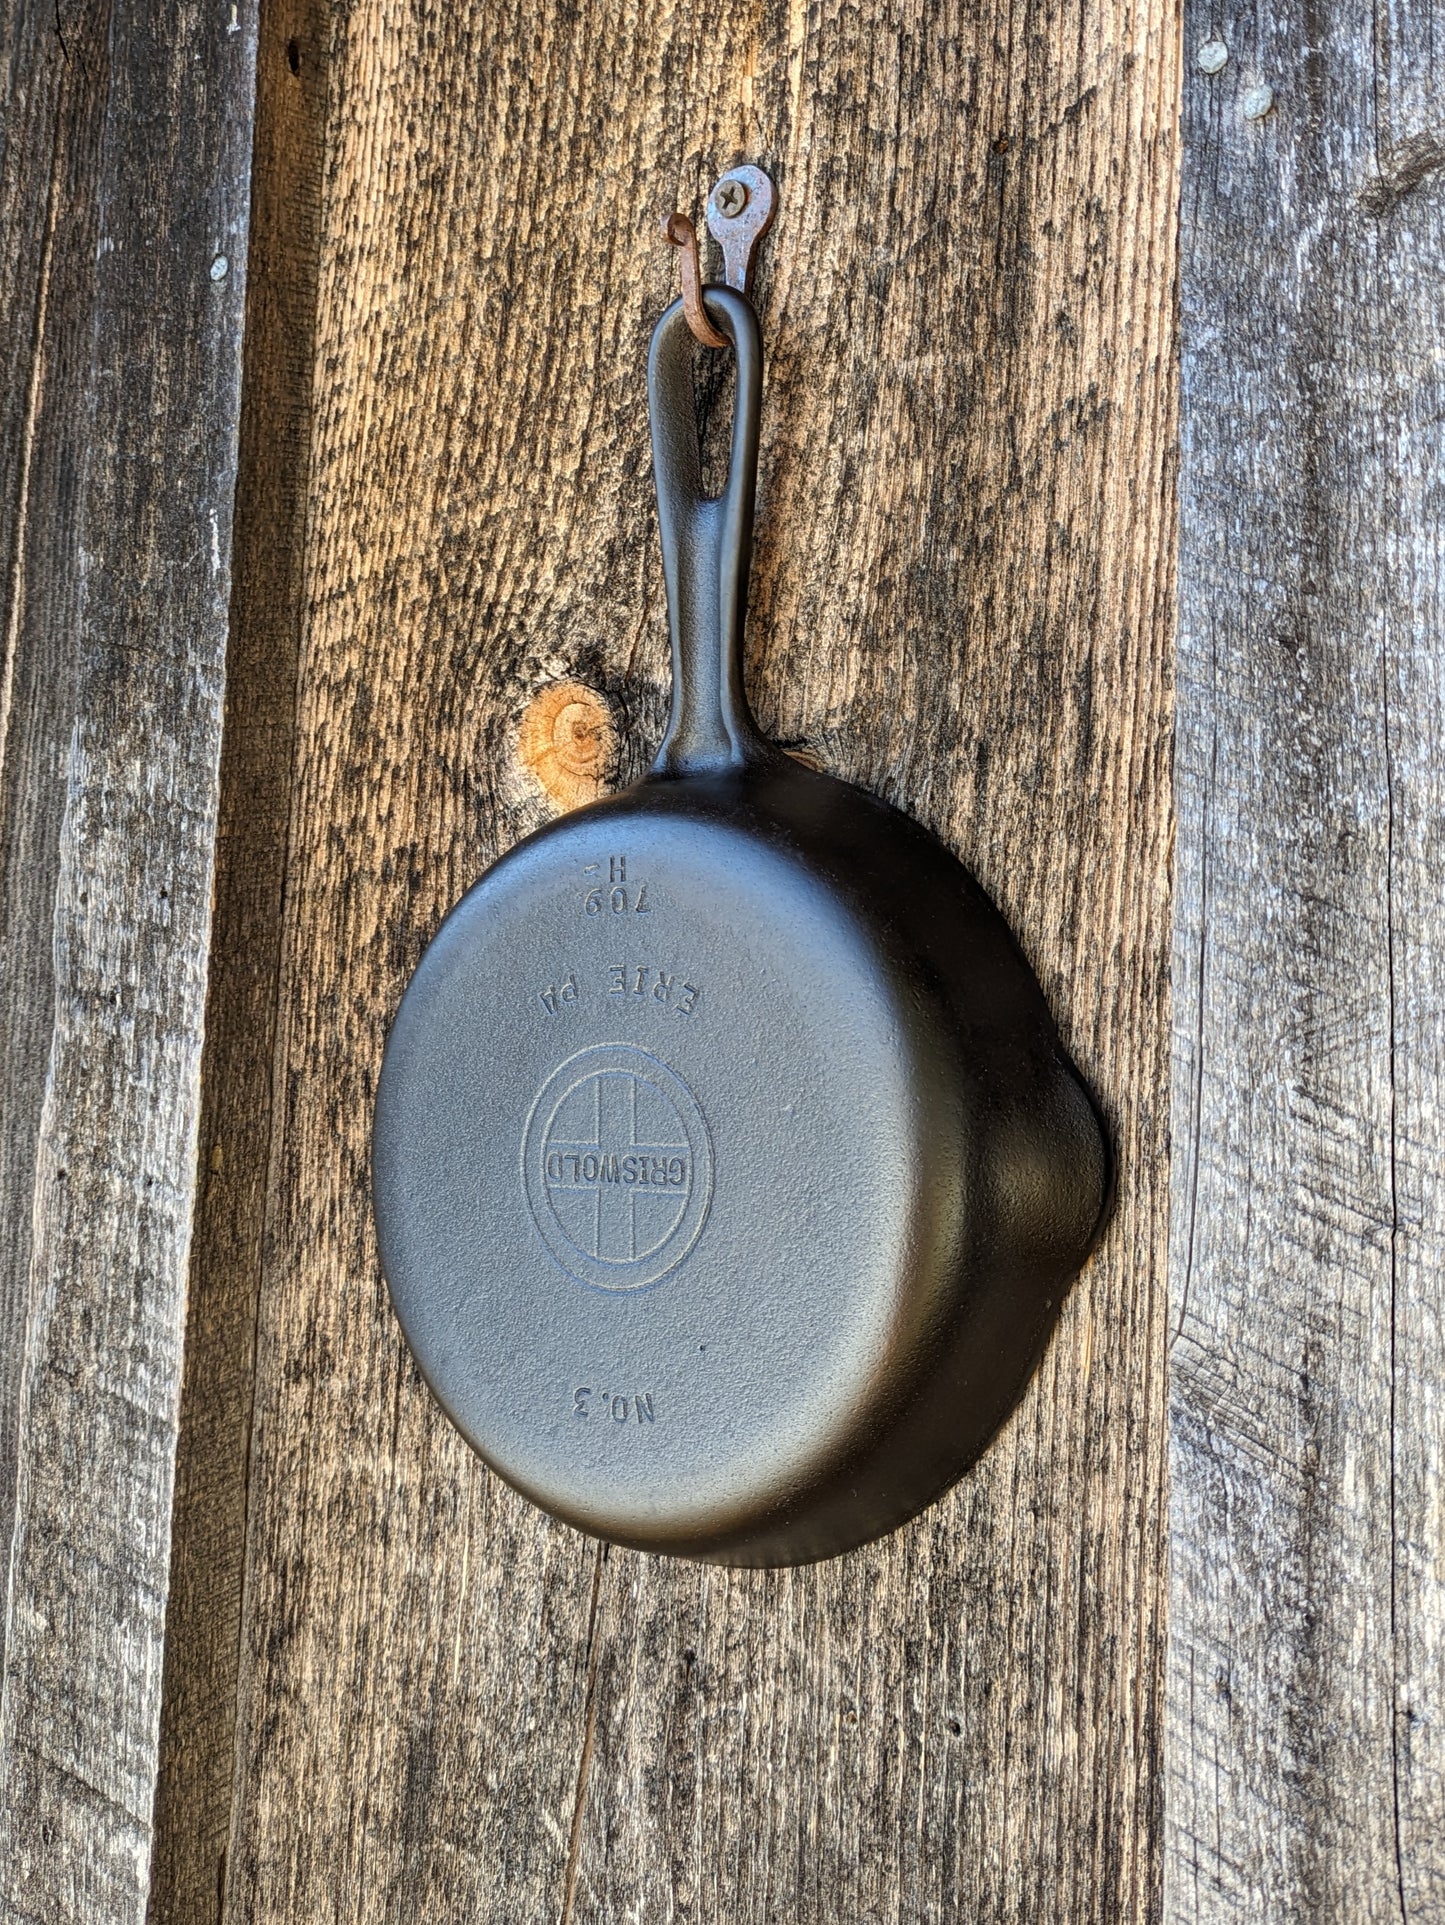 Griswold Small Block Logo #3 Cast Iron Skillet 709 H Grooved Handle